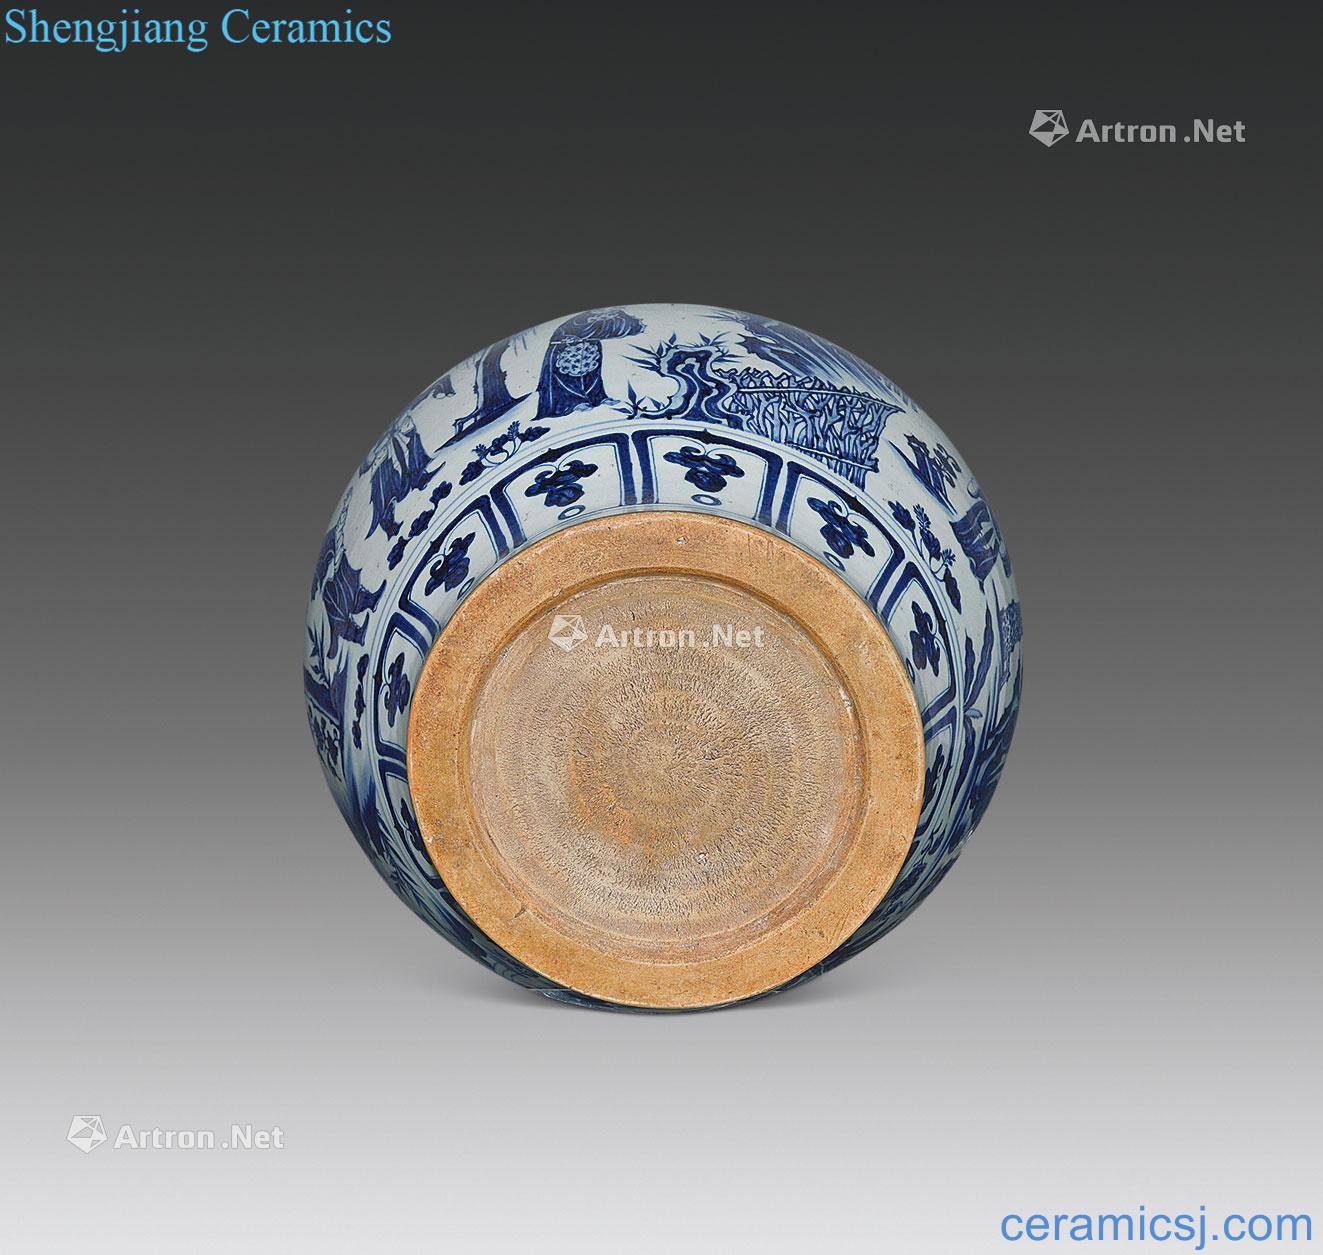 Stories of the yuan dynasty blue and white "sincerity" cans